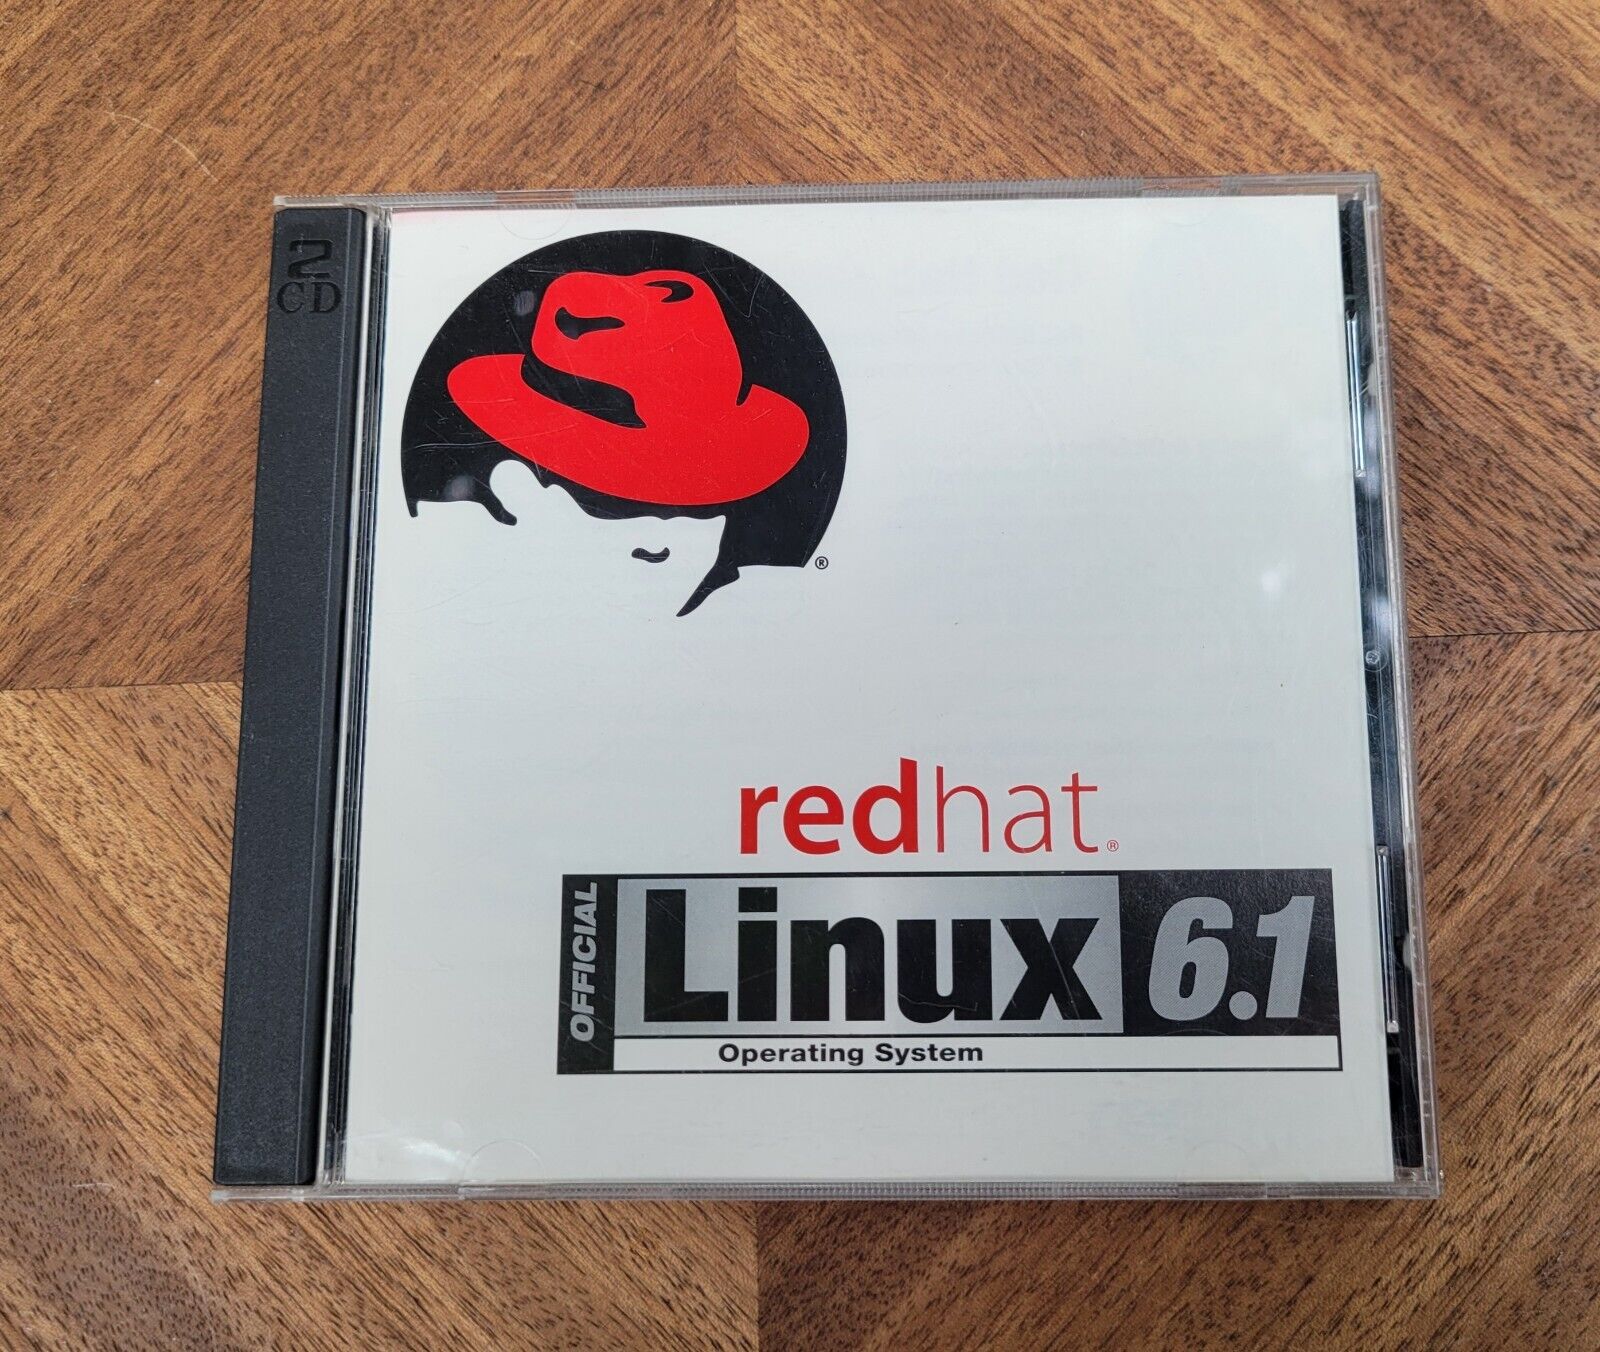 Redhat Linux 6.1 Operating System Software CD